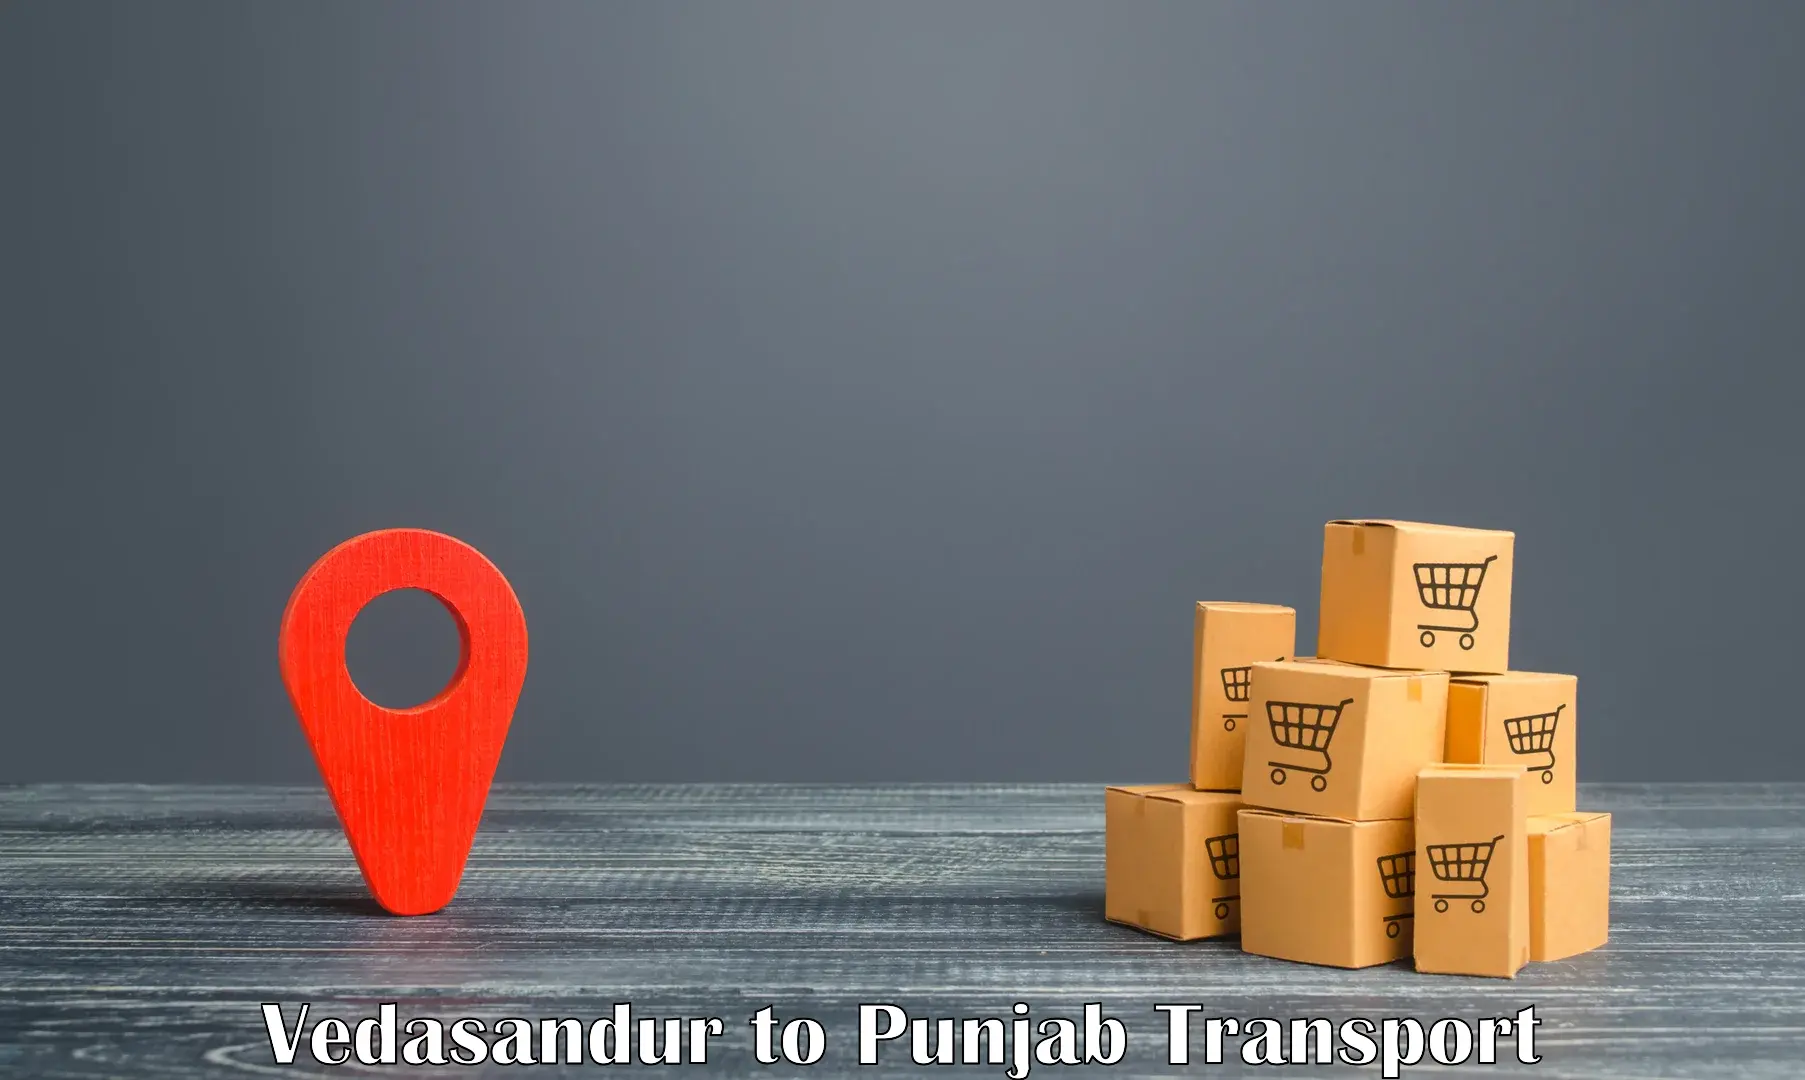 Transport bike from one state to another Vedasandur to Punjab